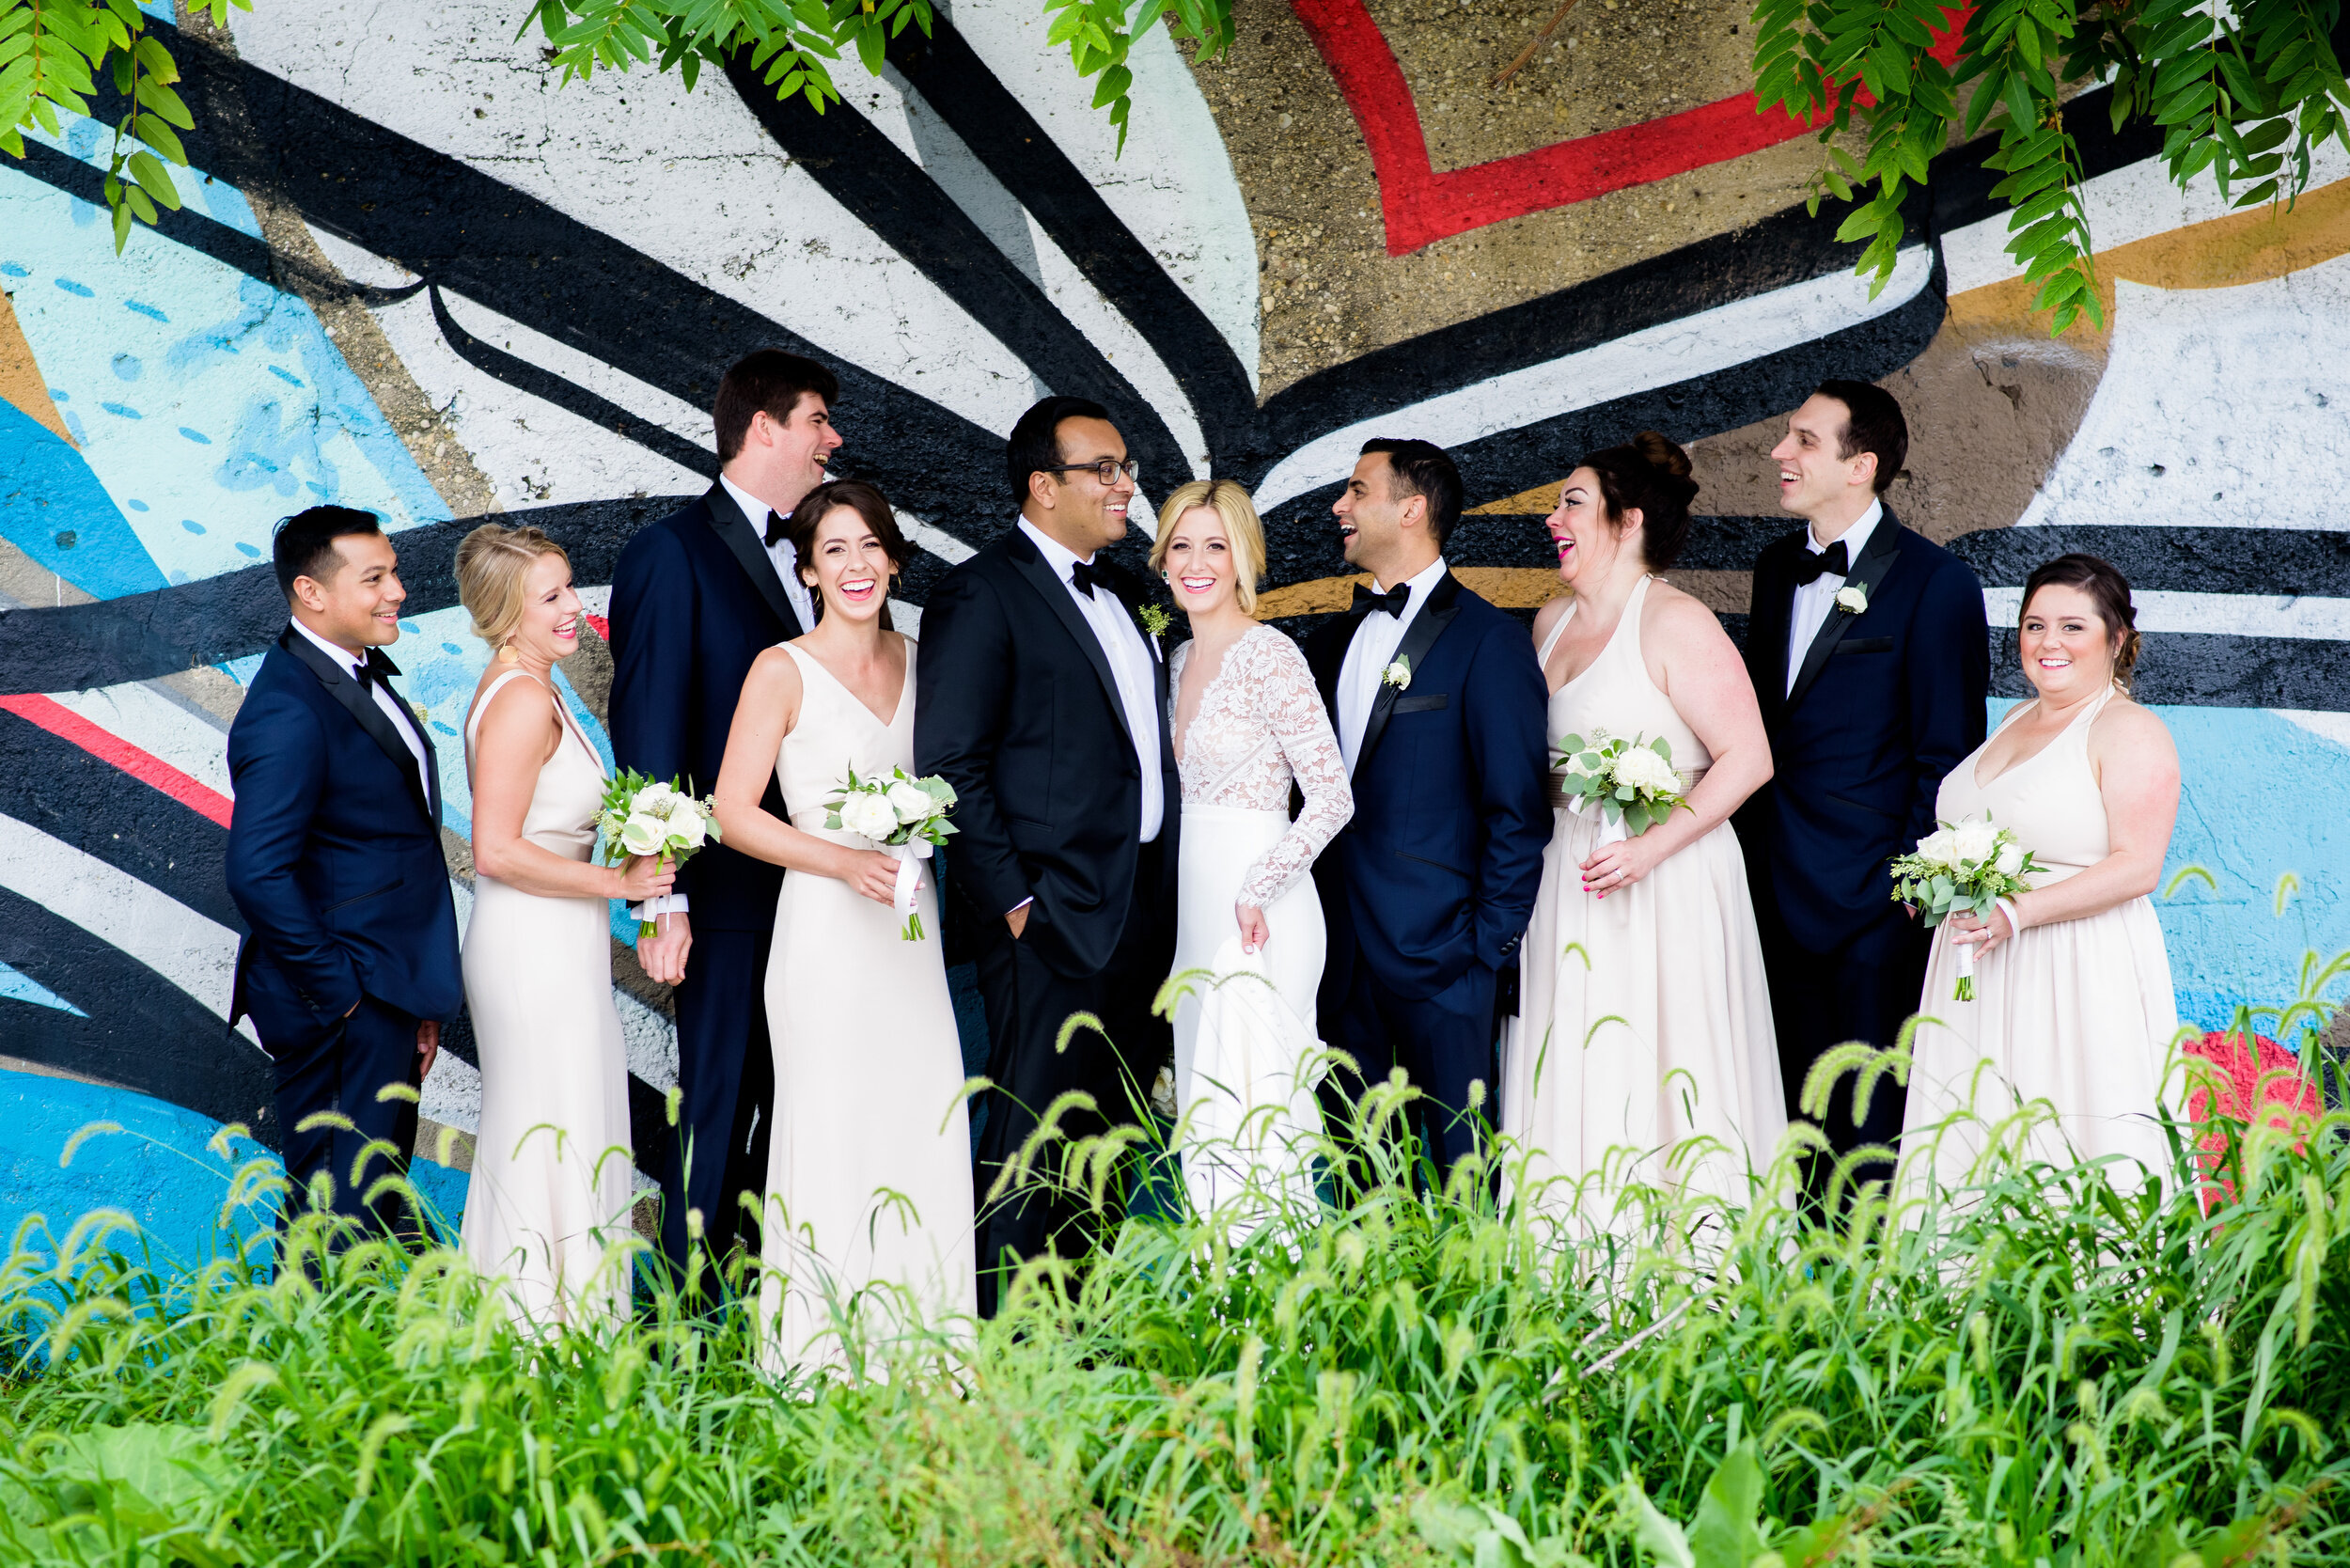 Fun wedding party portrait with street art mural in Pilsen: Geraghty Chicago wedding photography captured by J. Brown Photography.